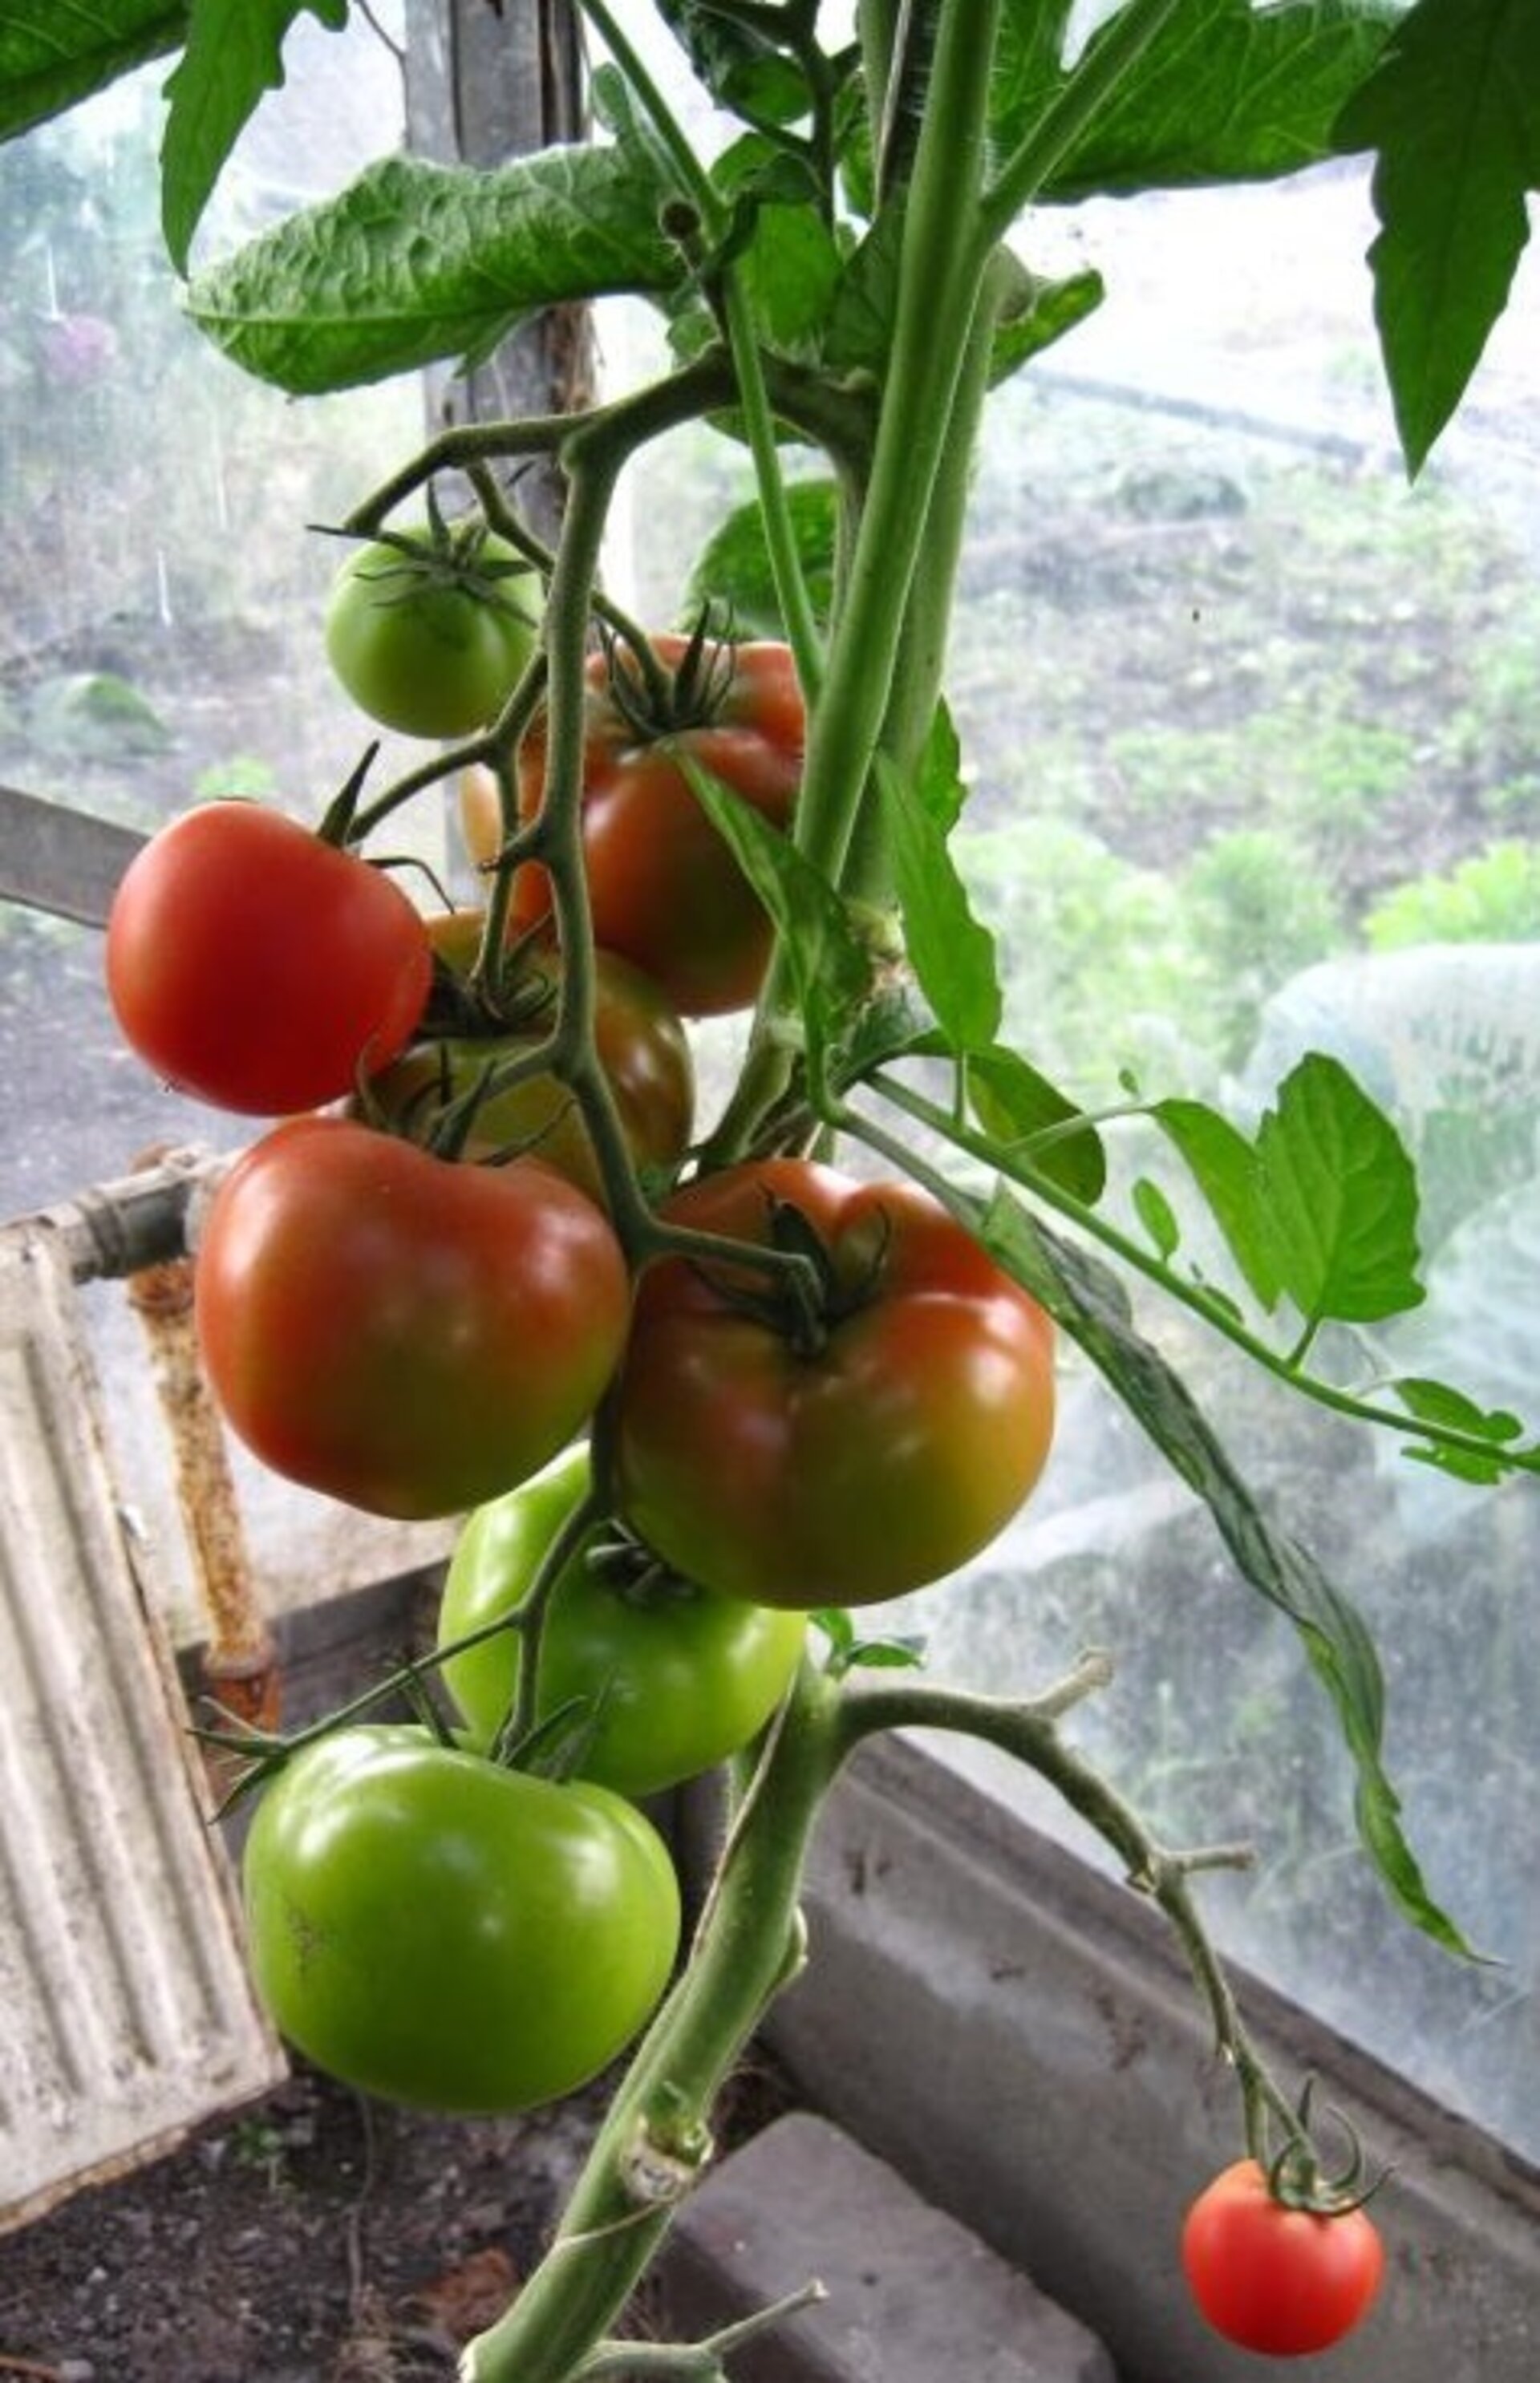 Hot house tomatoes